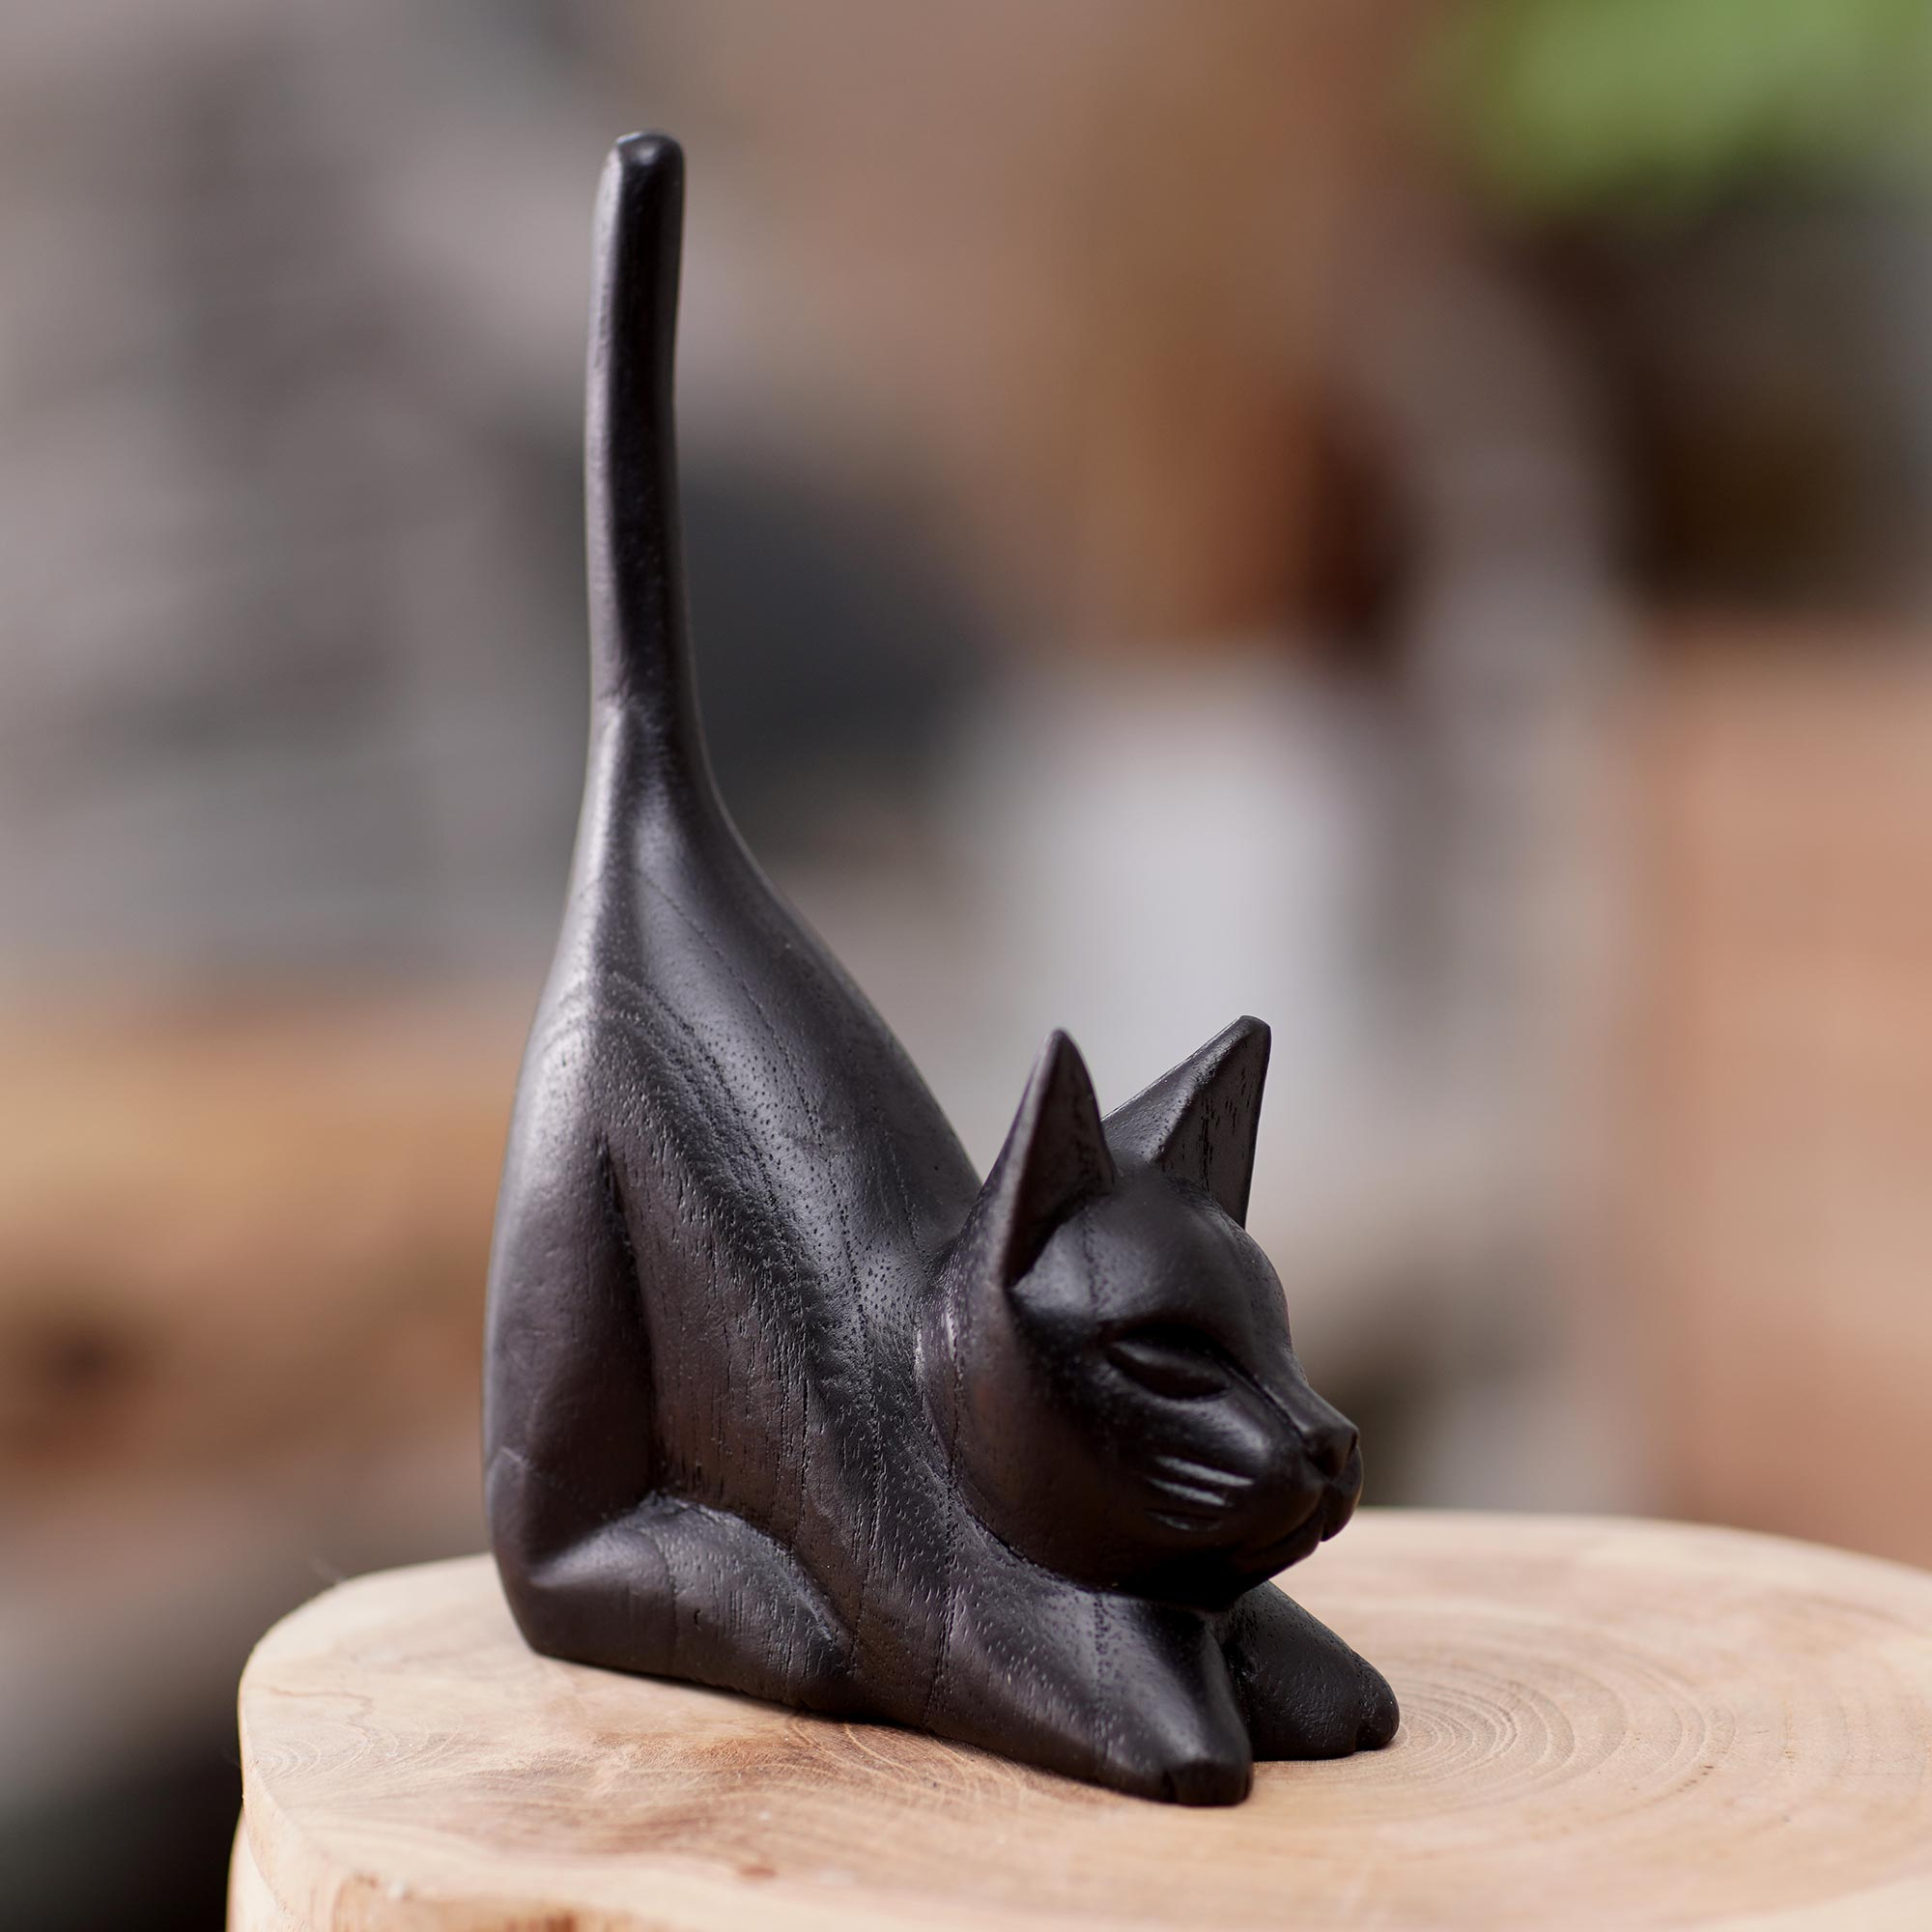 Brown Cat Sculpture Hand-Carved from Jempinis Wood in Bali